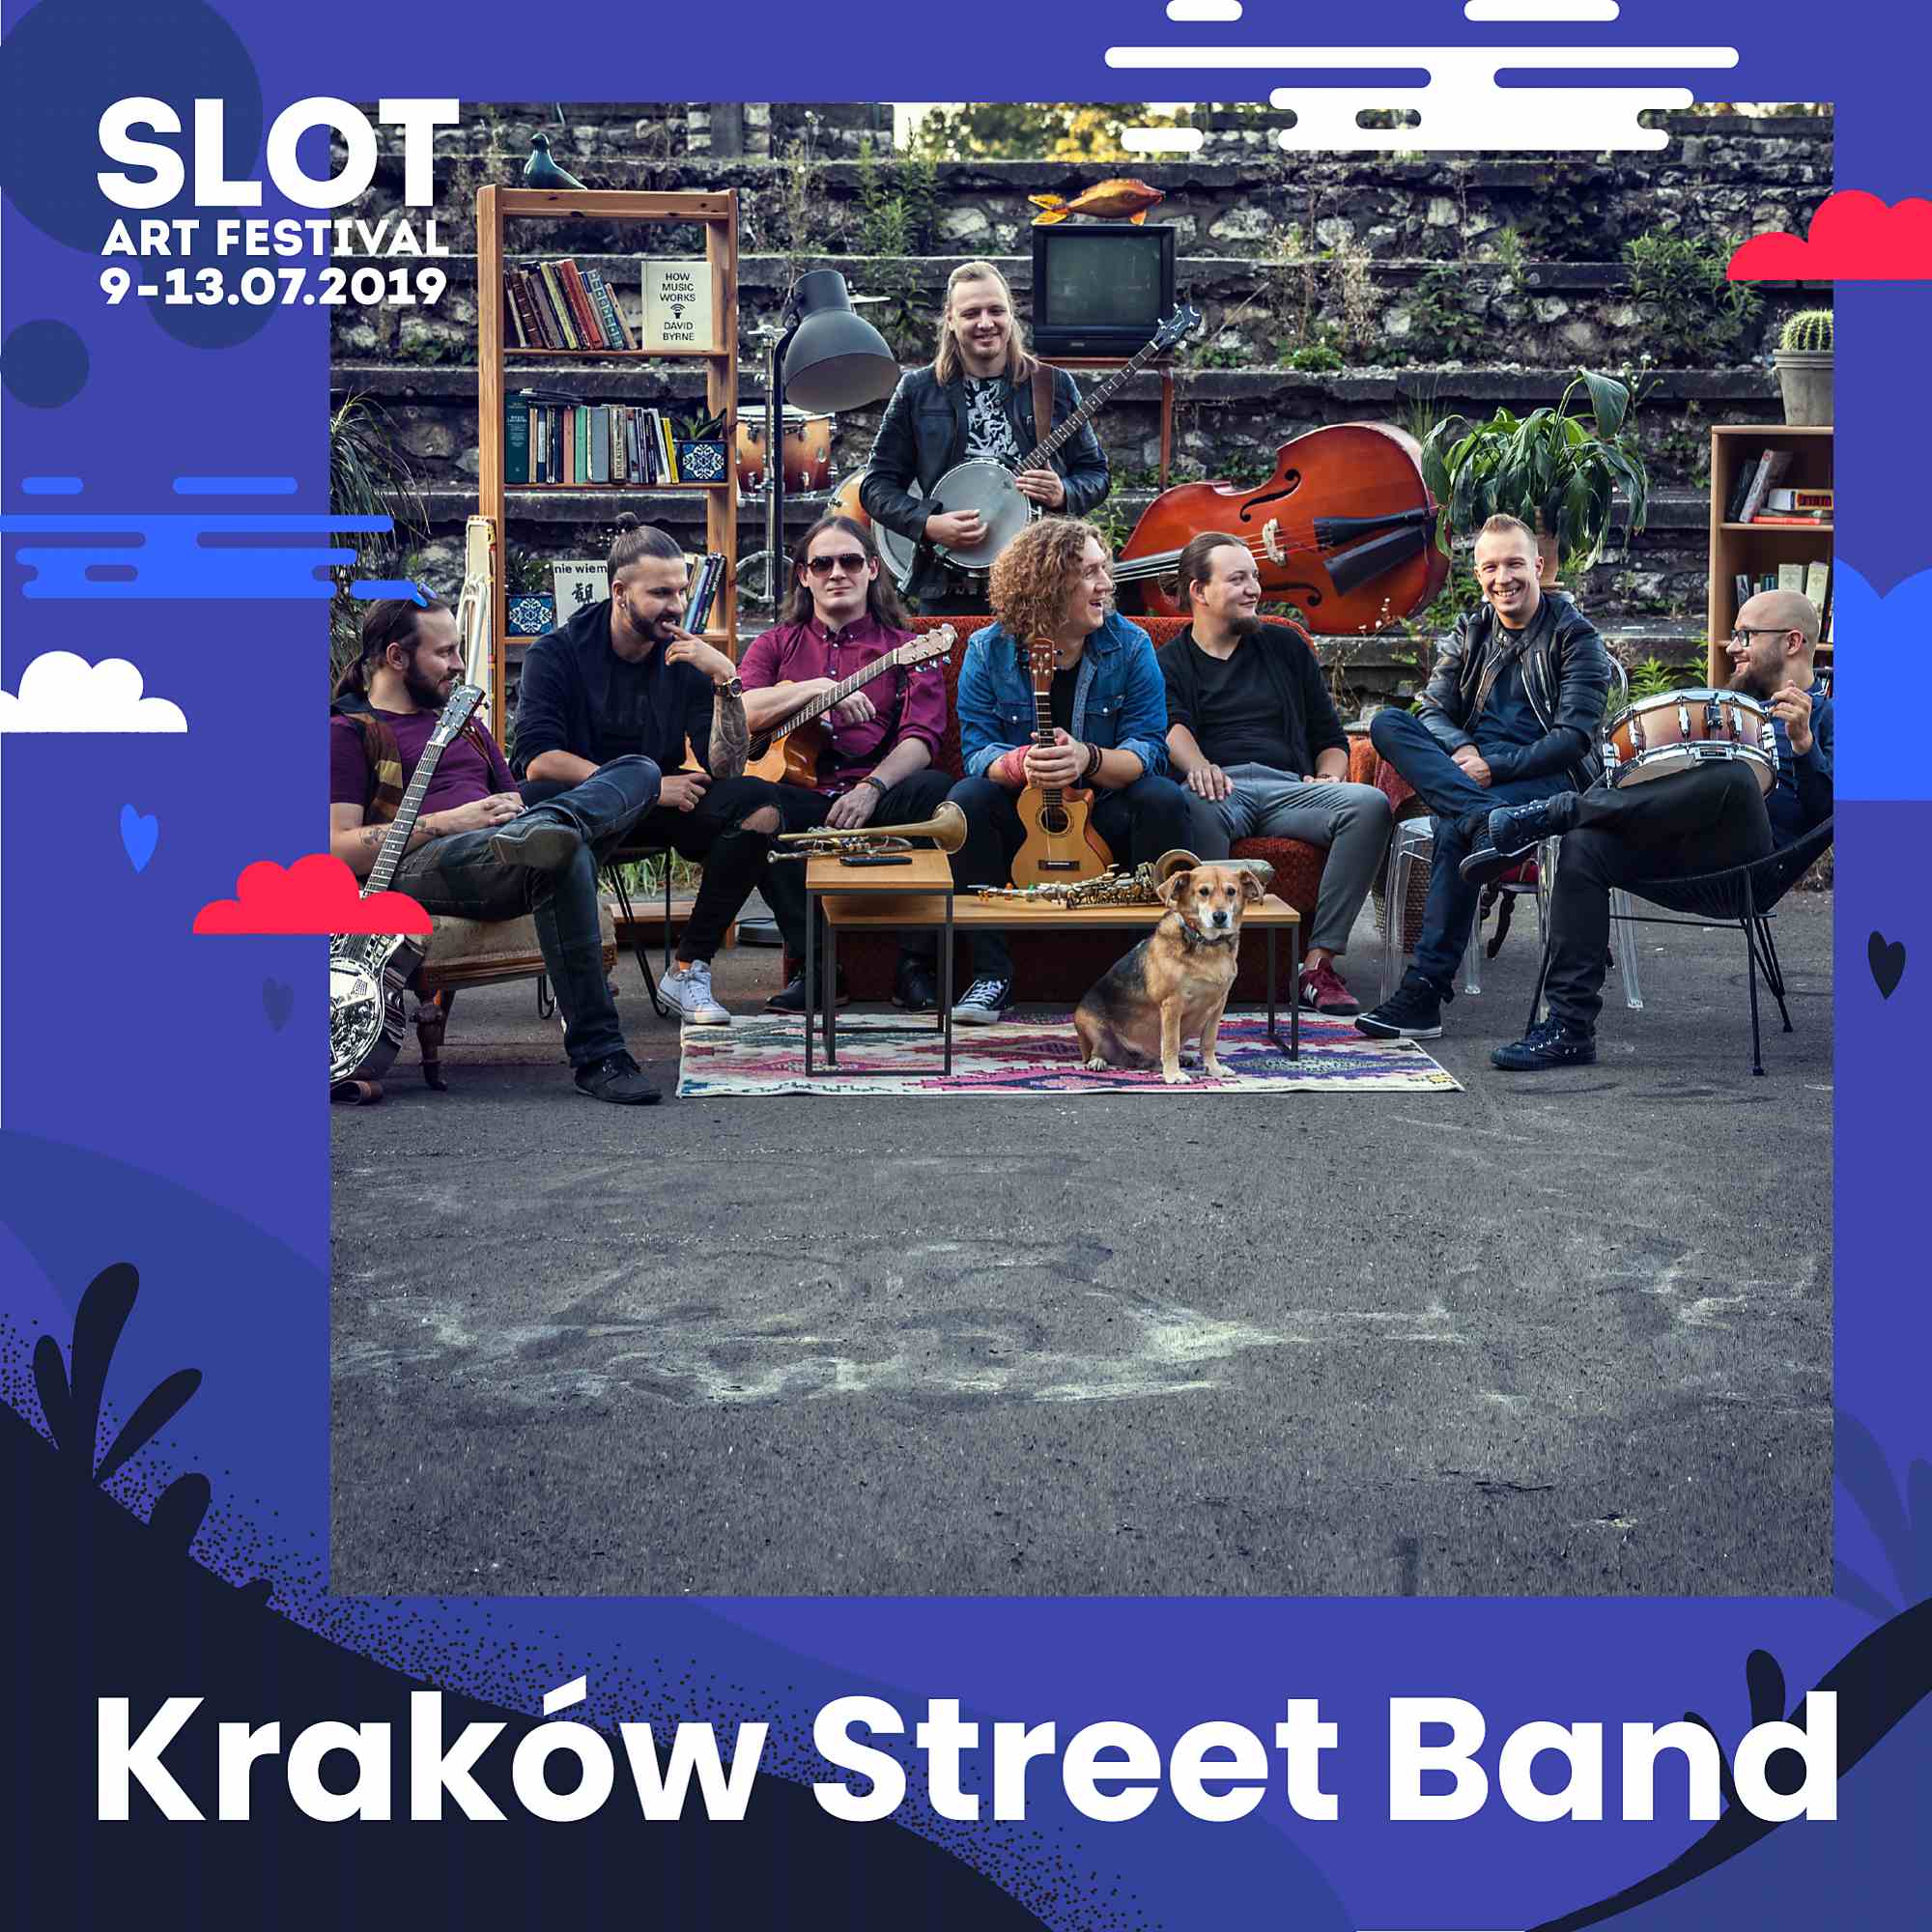 Party event by Slot Art Festival on Tuesday, July 9 with K people interested and K people going.posts in the discussion.